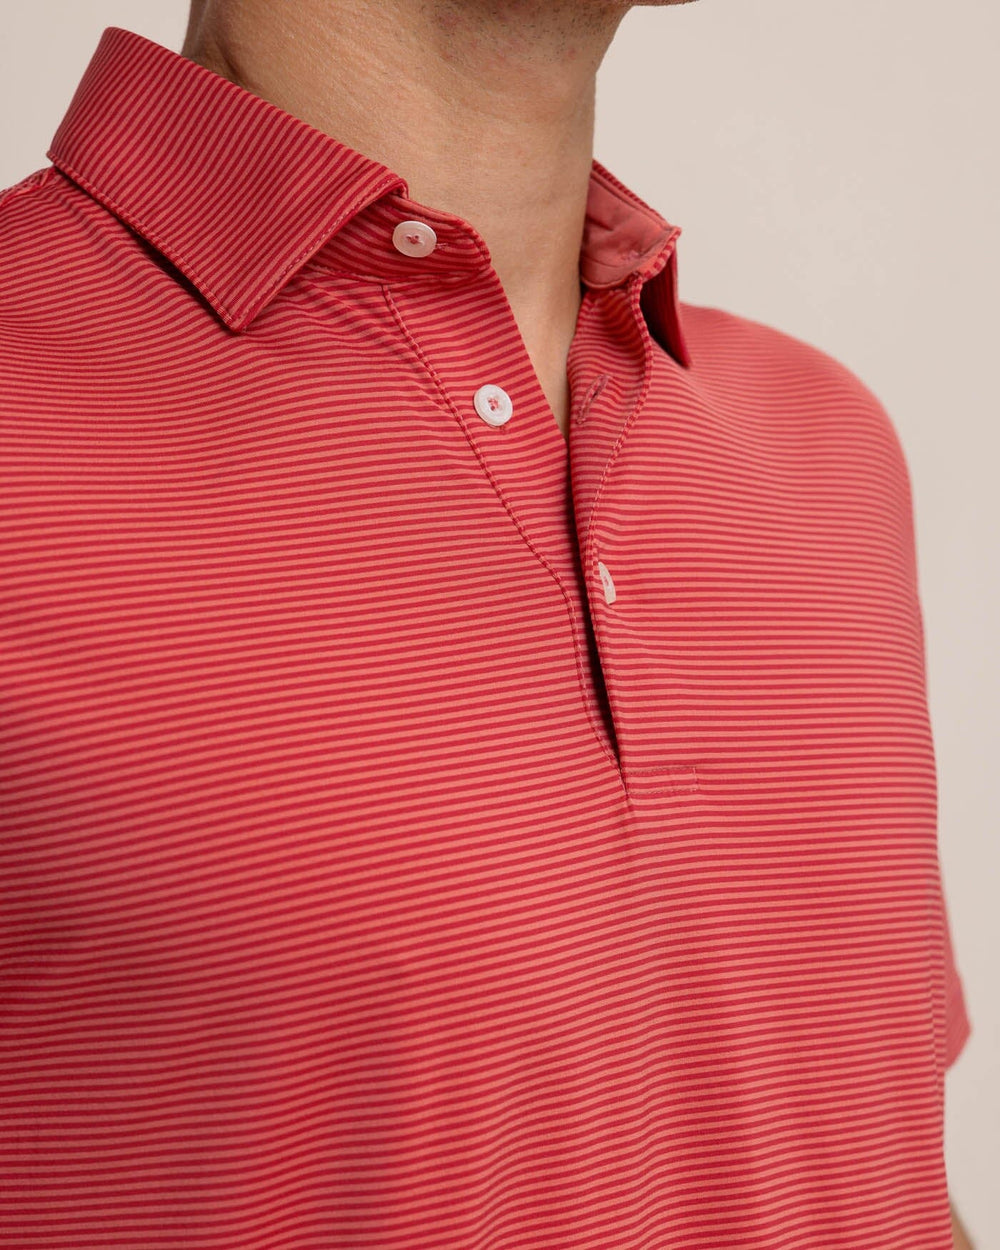 The detail view of the Southern Tide brrr-eeze Meadowbrook Stripe Polo by Southern Tide - Mineral Red